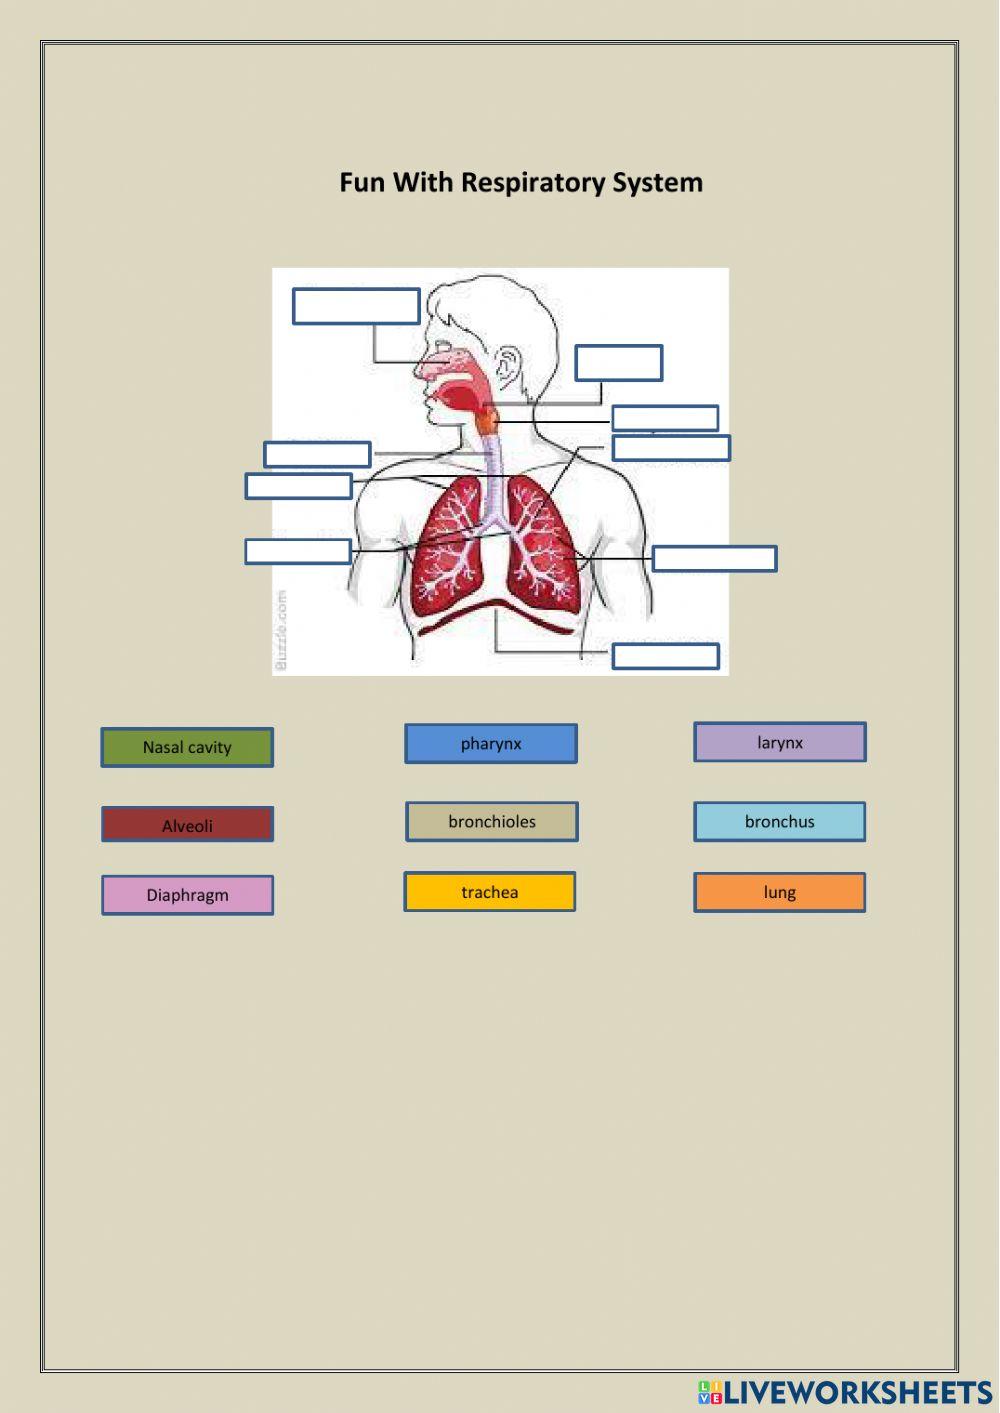 Fun with respiratory system